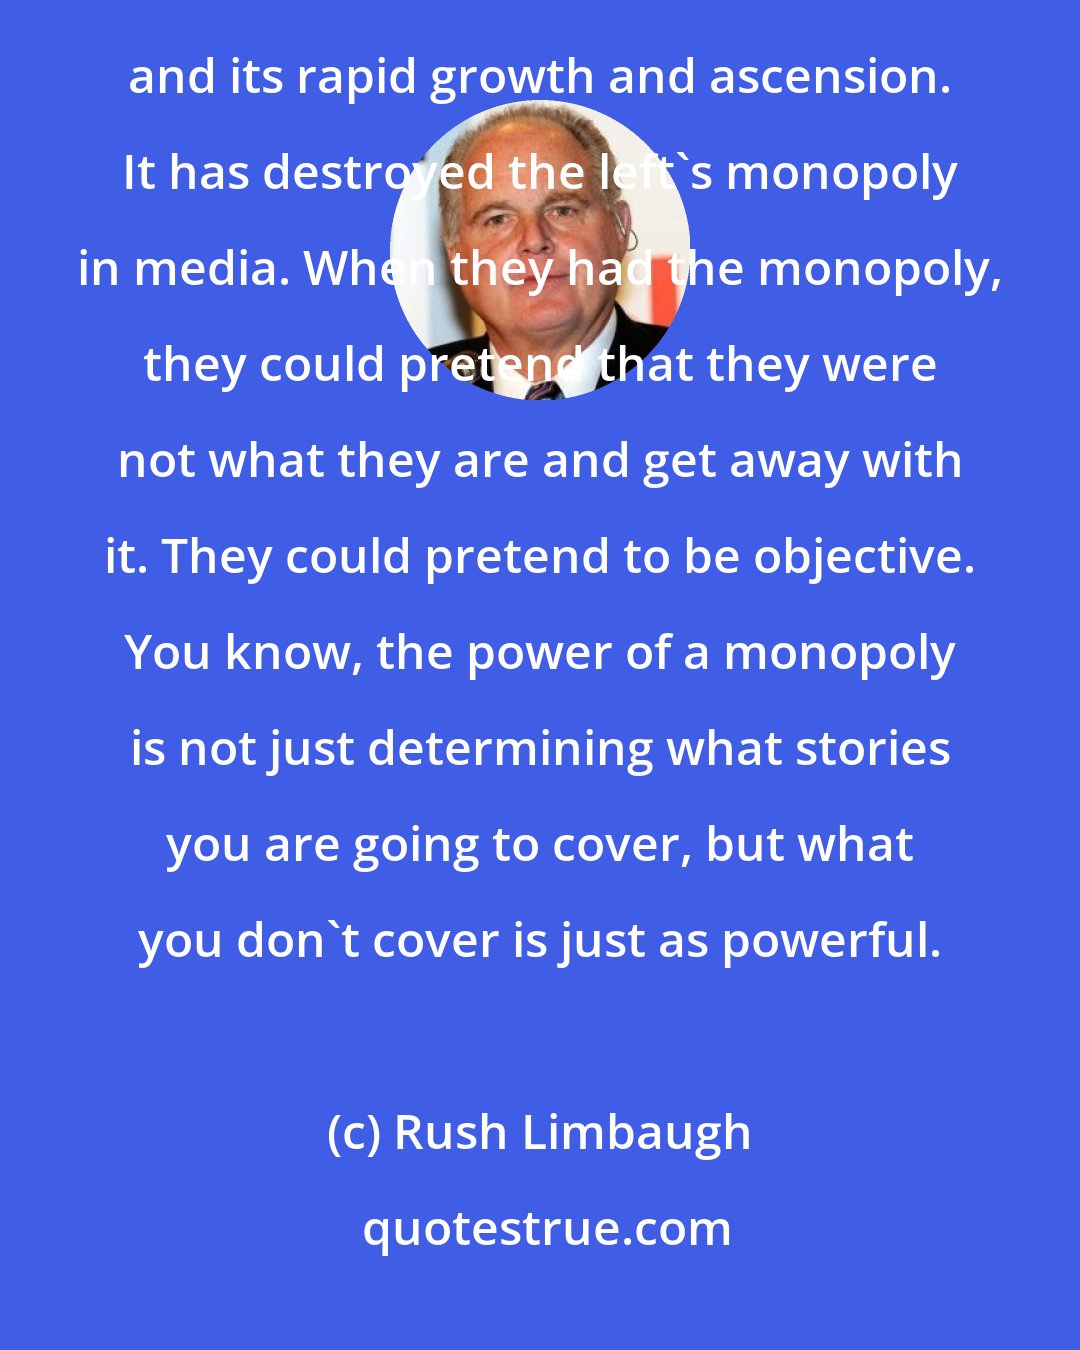 Rush Limbaugh: I really am convinced that what is happening in media today is the result of the birth of conservative media and its rapid growth and ascension. It has destroyed the left's monopoly in media. When they had the monopoly, they could pretend that they were not what they are and get away with it. They could pretend to be objective. You know, the power of a monopoly is not just determining what stories you are going to cover, but what you don't cover is just as powerful.